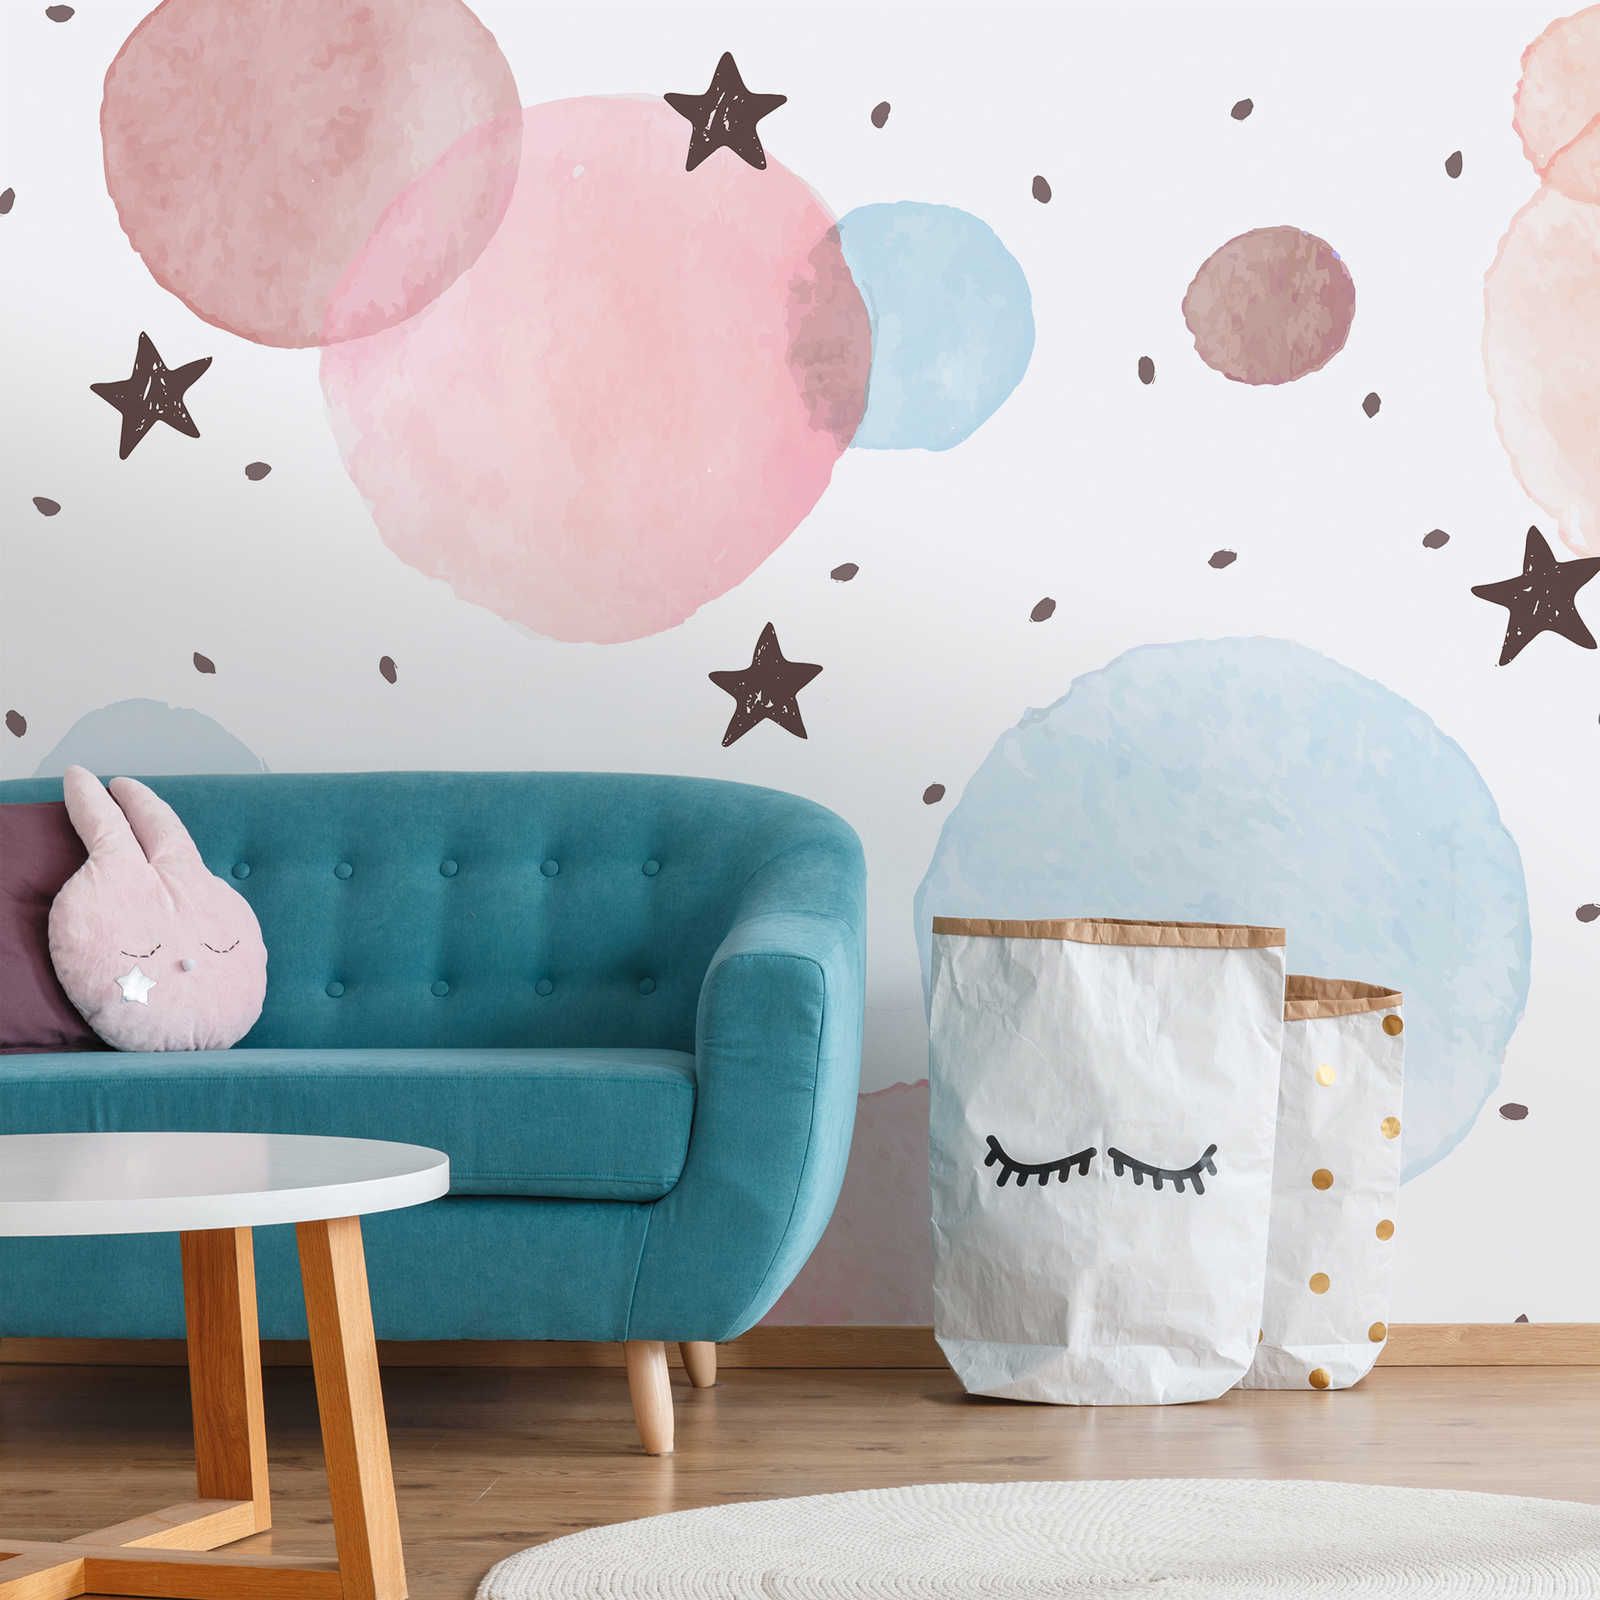         Photo wallpaper for children's room with stars, dots and circles - Smooth & slightly shiny non-woven
    